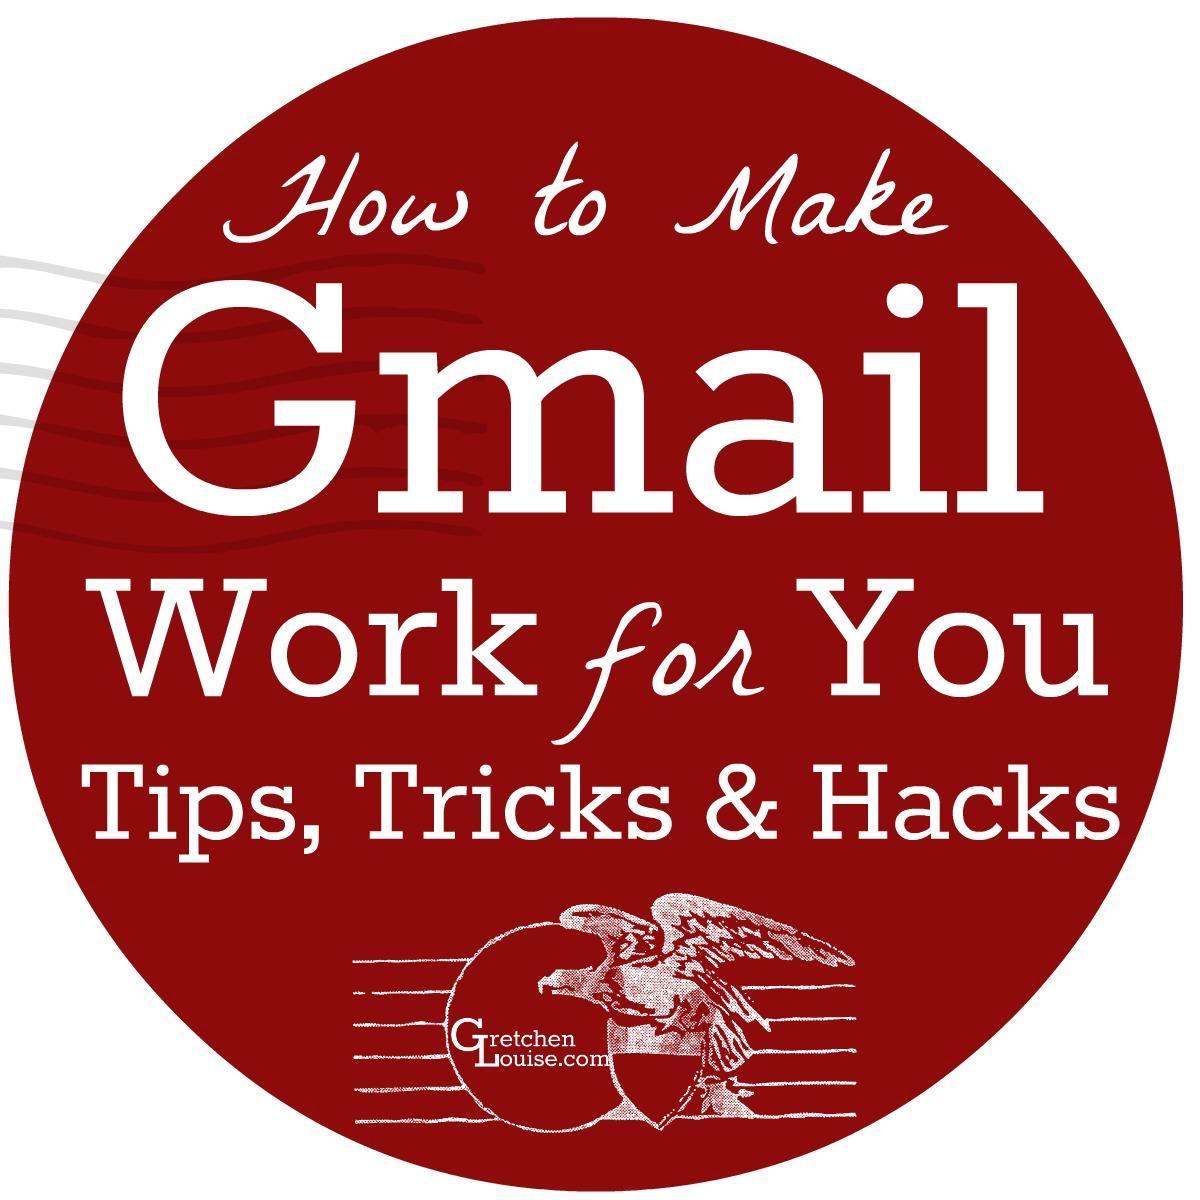 How to Make Gmail Work for You